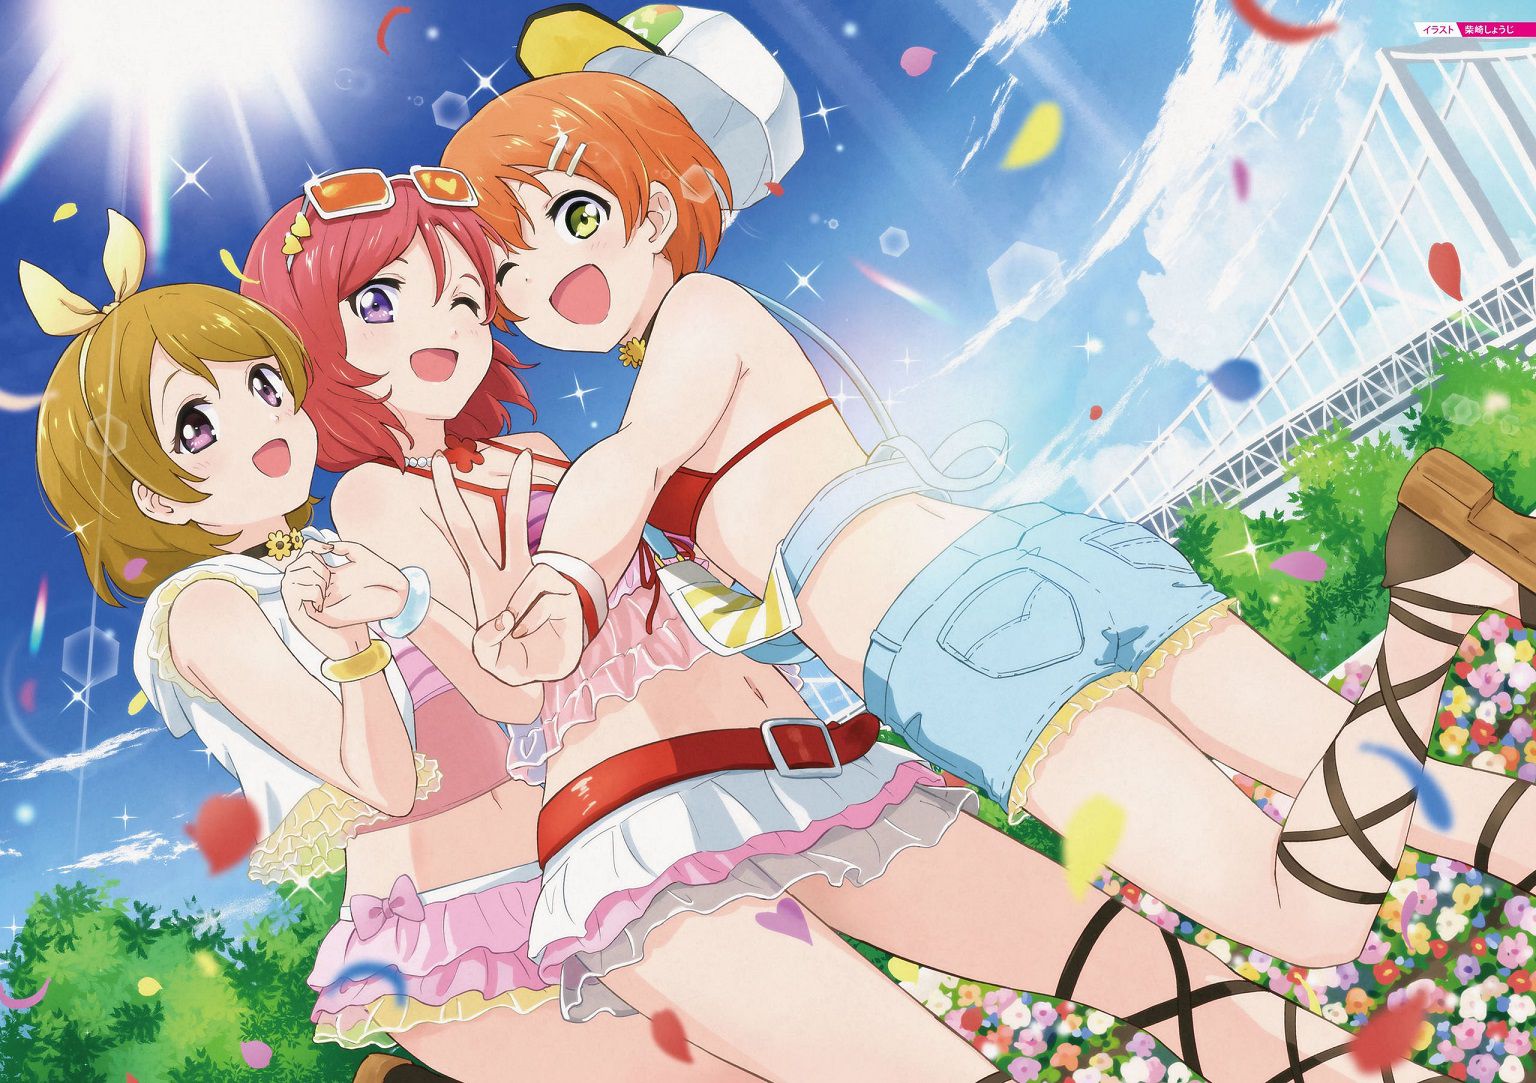 [Love Live! ] Carefully selected erotic image of the members of the mu's (muse) total 194th bullet 40